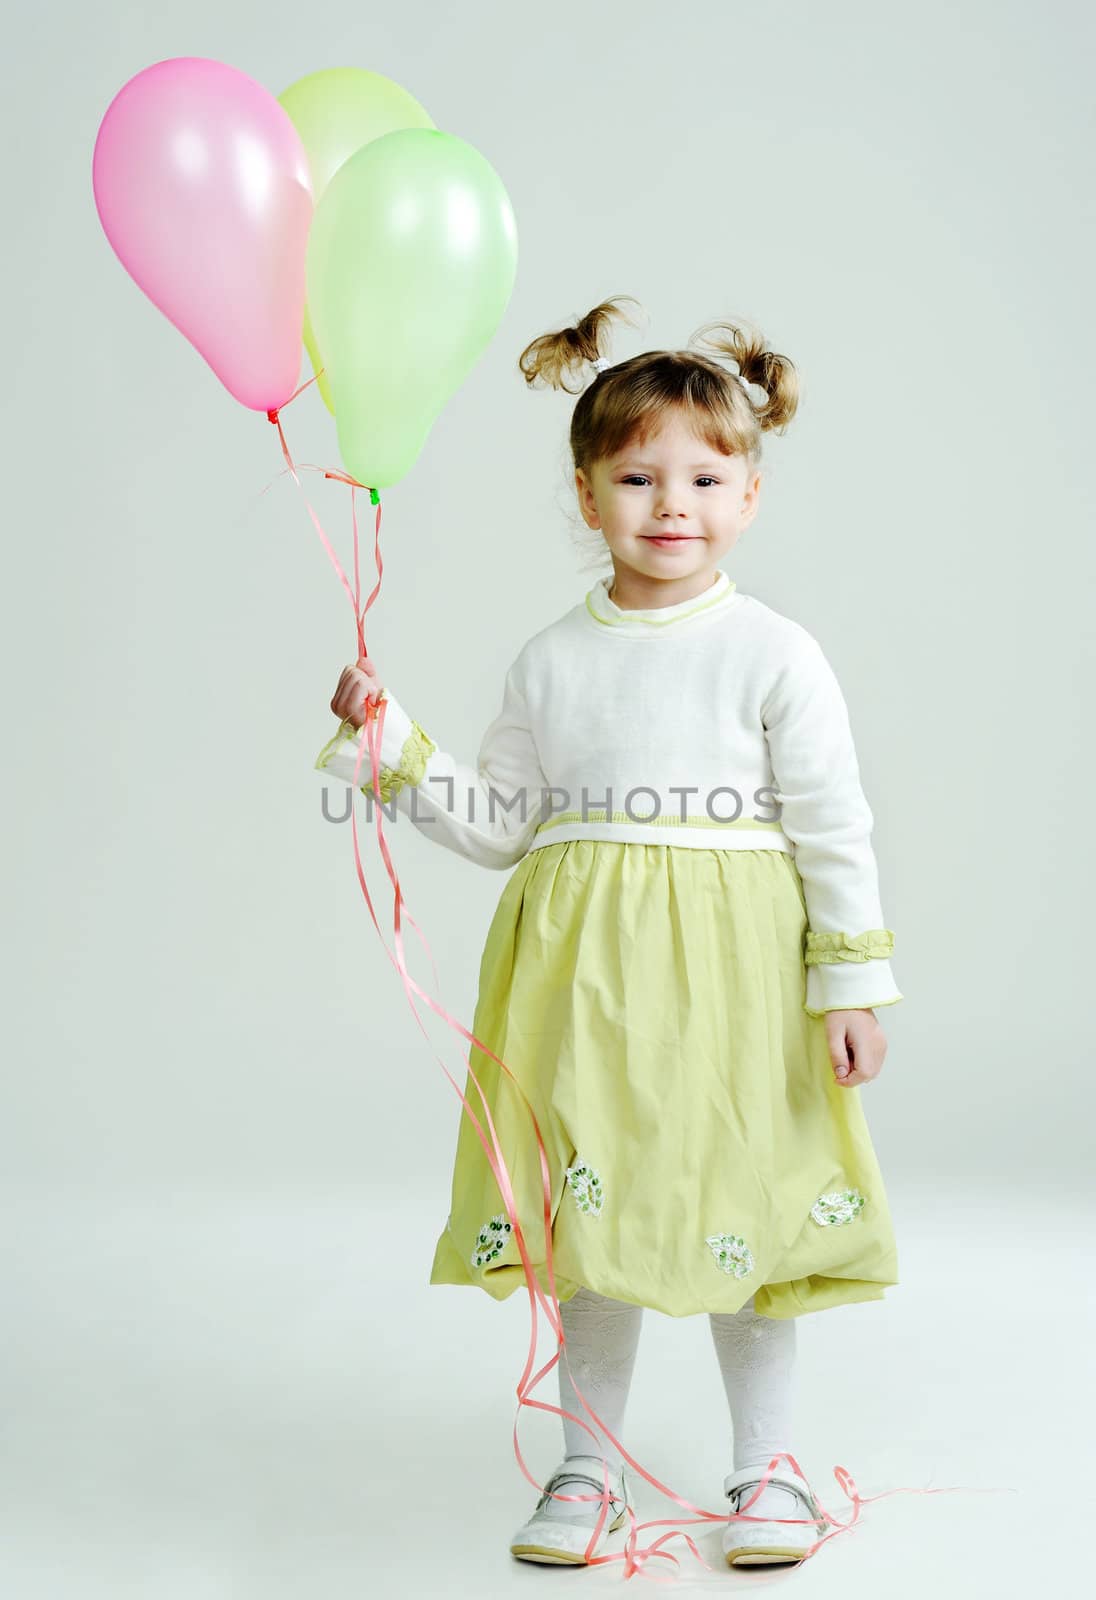 A portrait of a nice little girl with three balloons